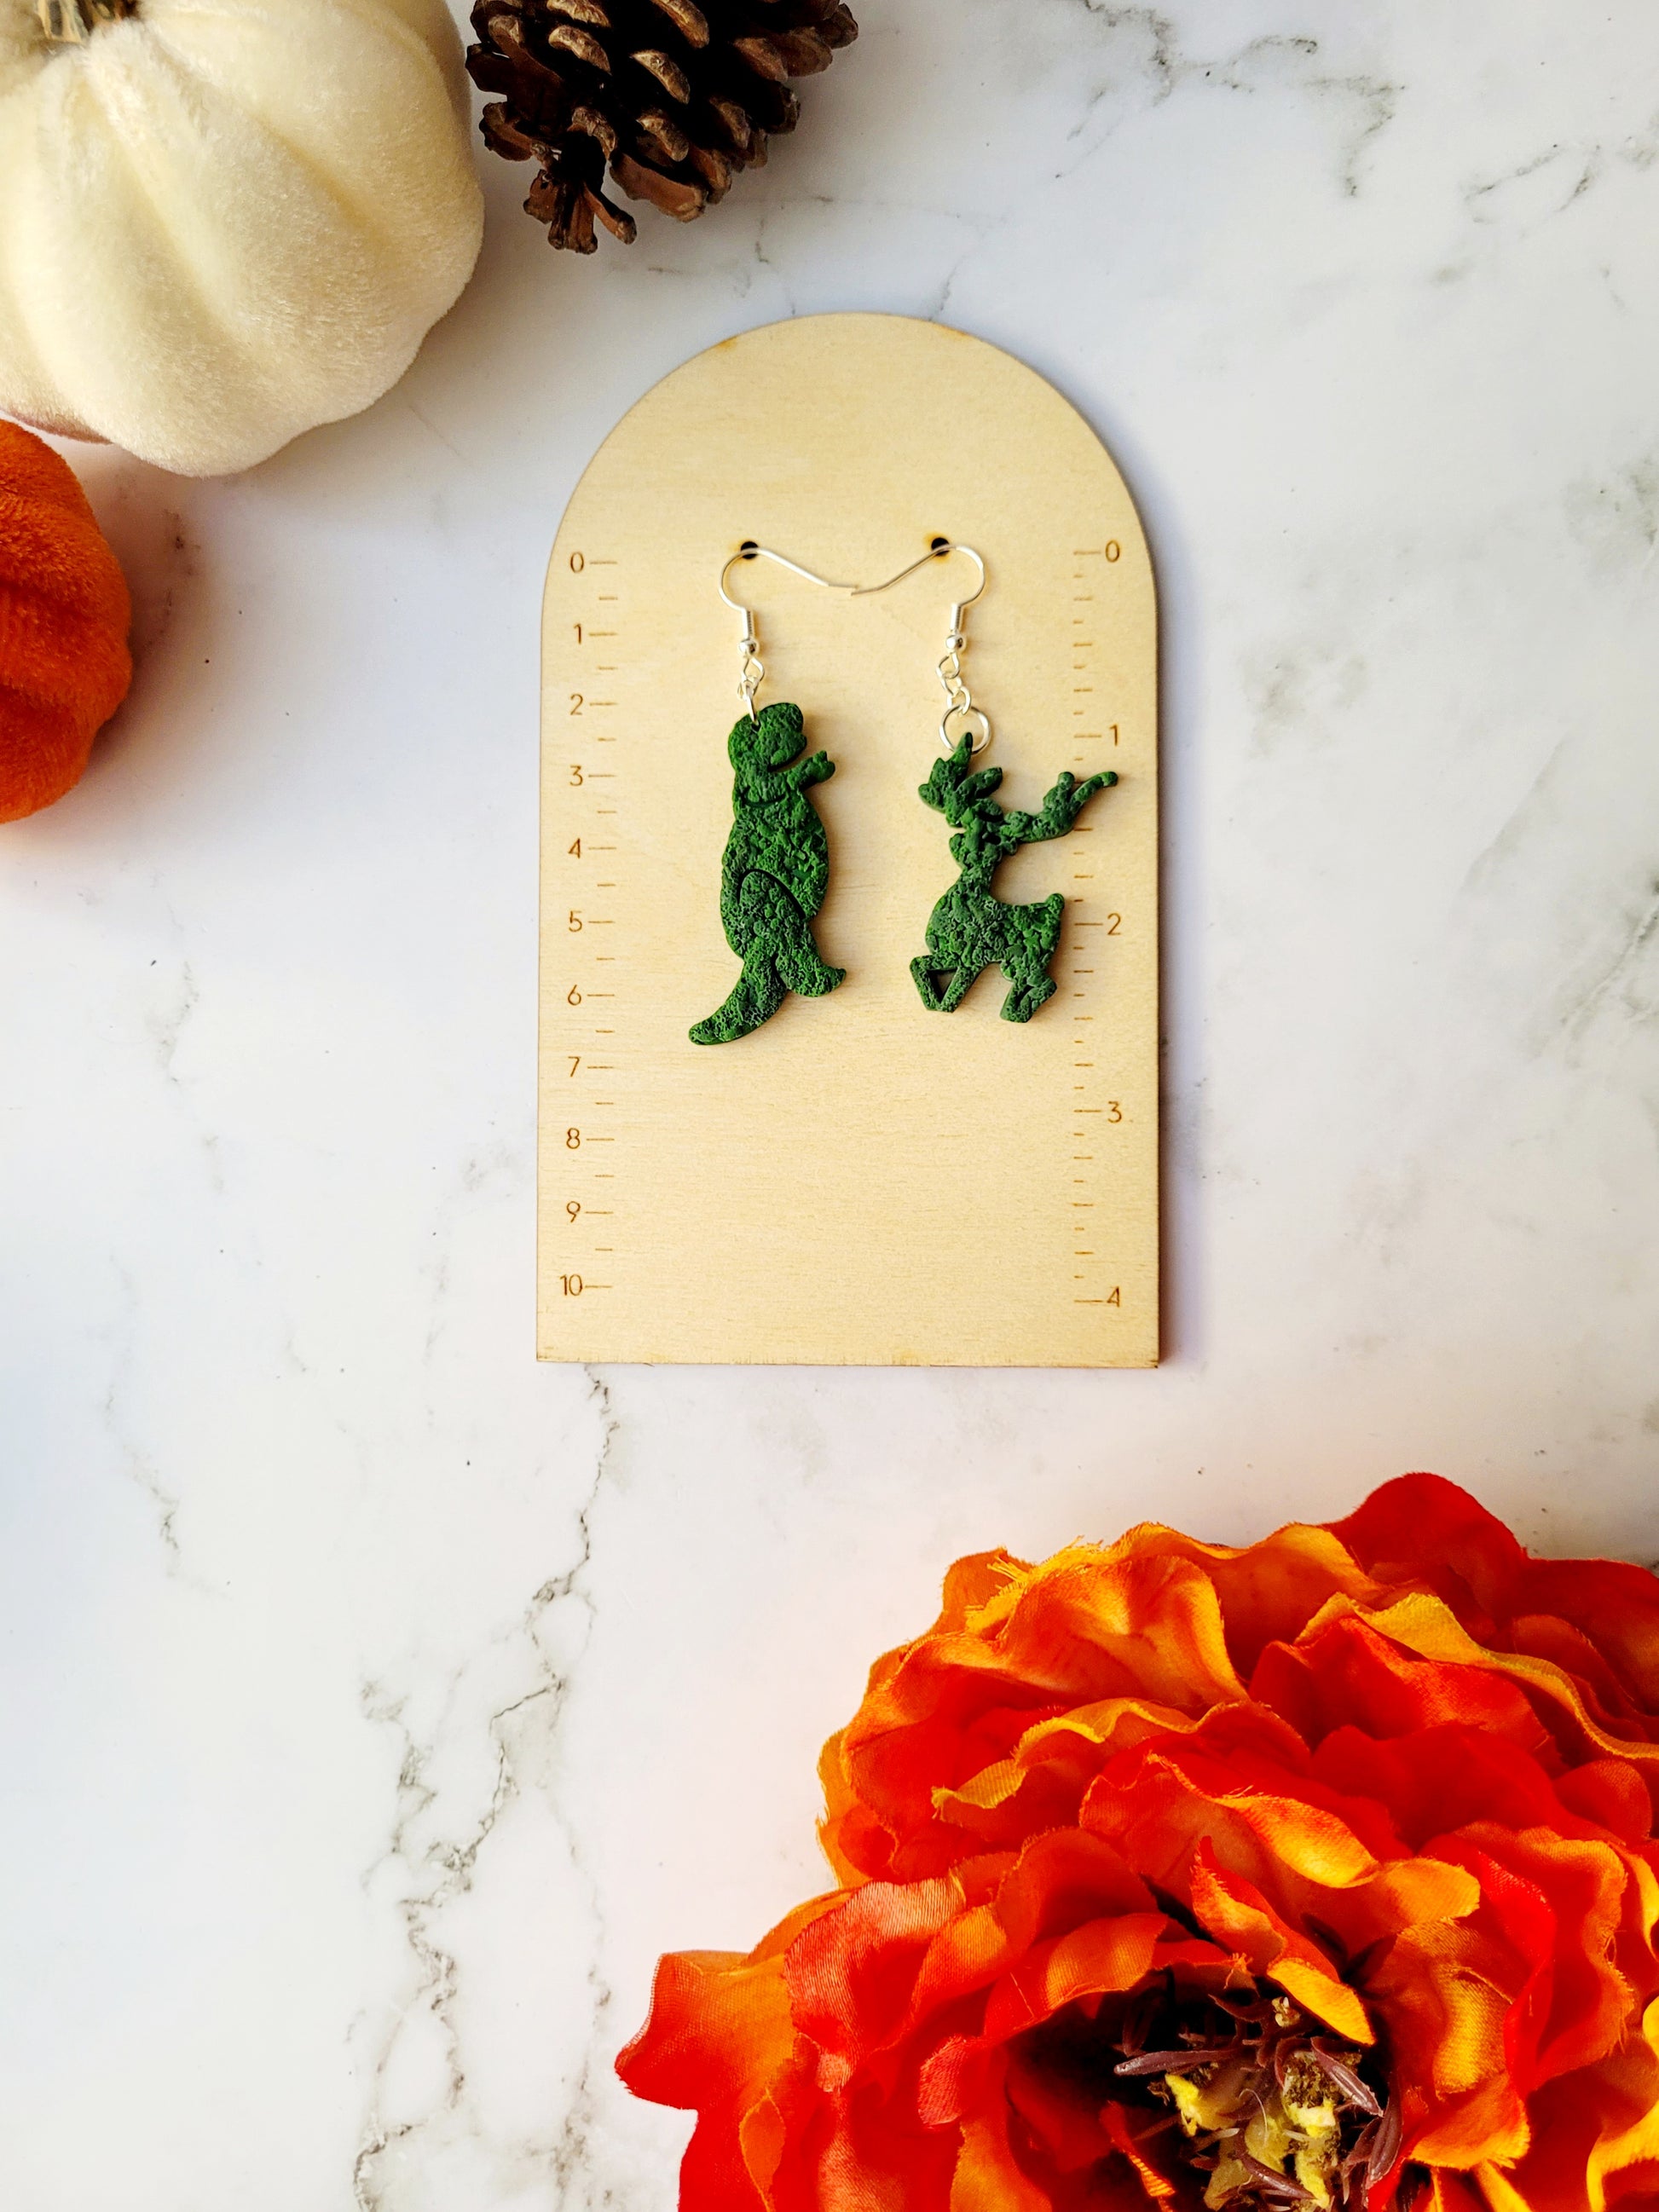 Edward Scissorhands themed topiary earrings on a ruler background.